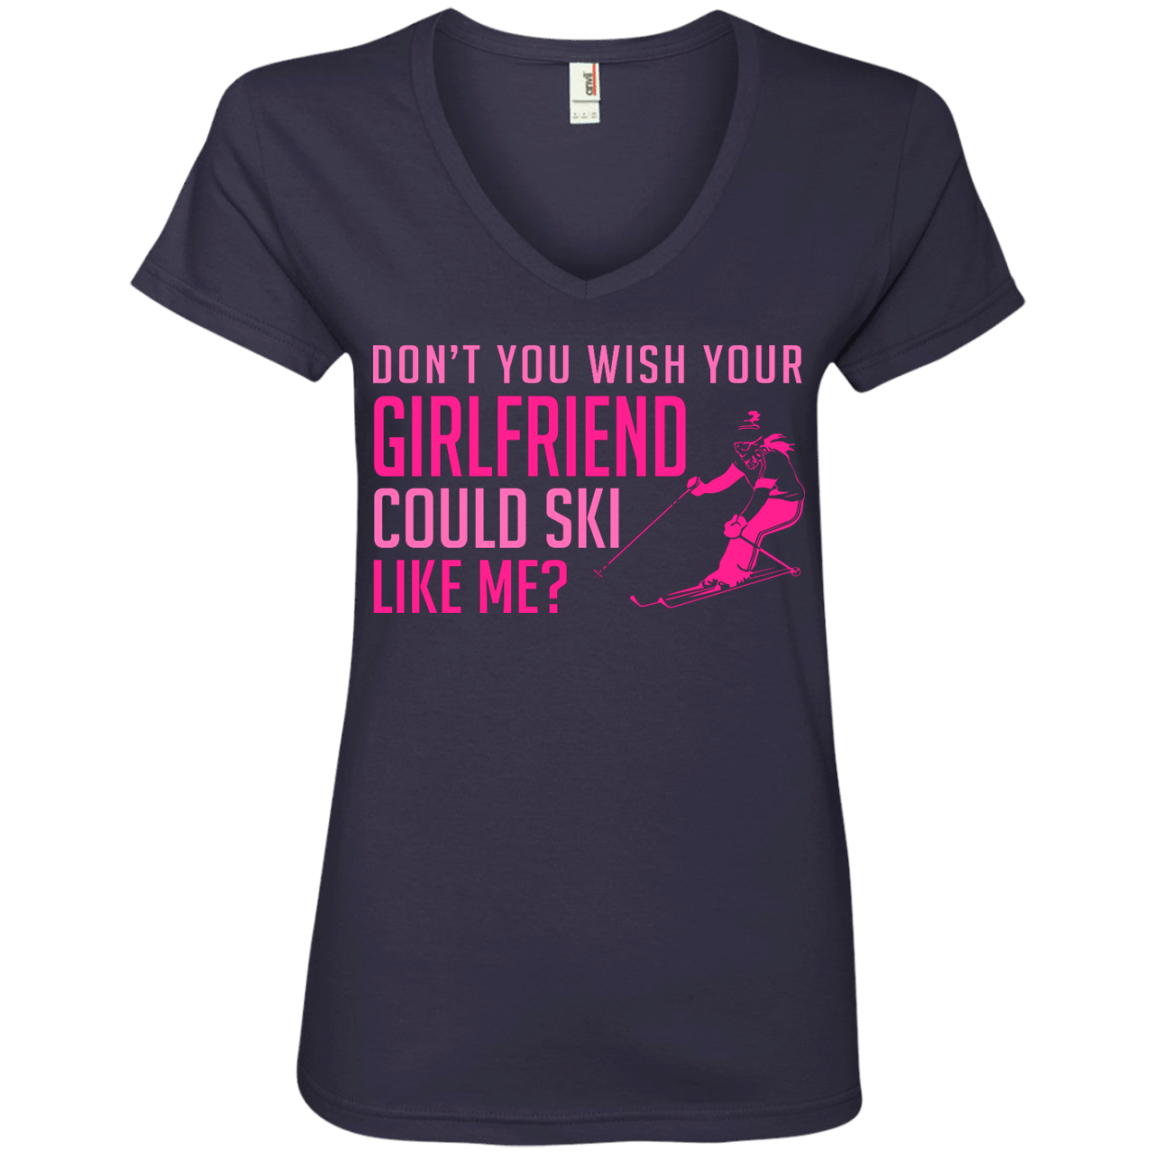 Don't You Wish Your Girlfriend Could Ski Like Me? Tees | Powderaddicts